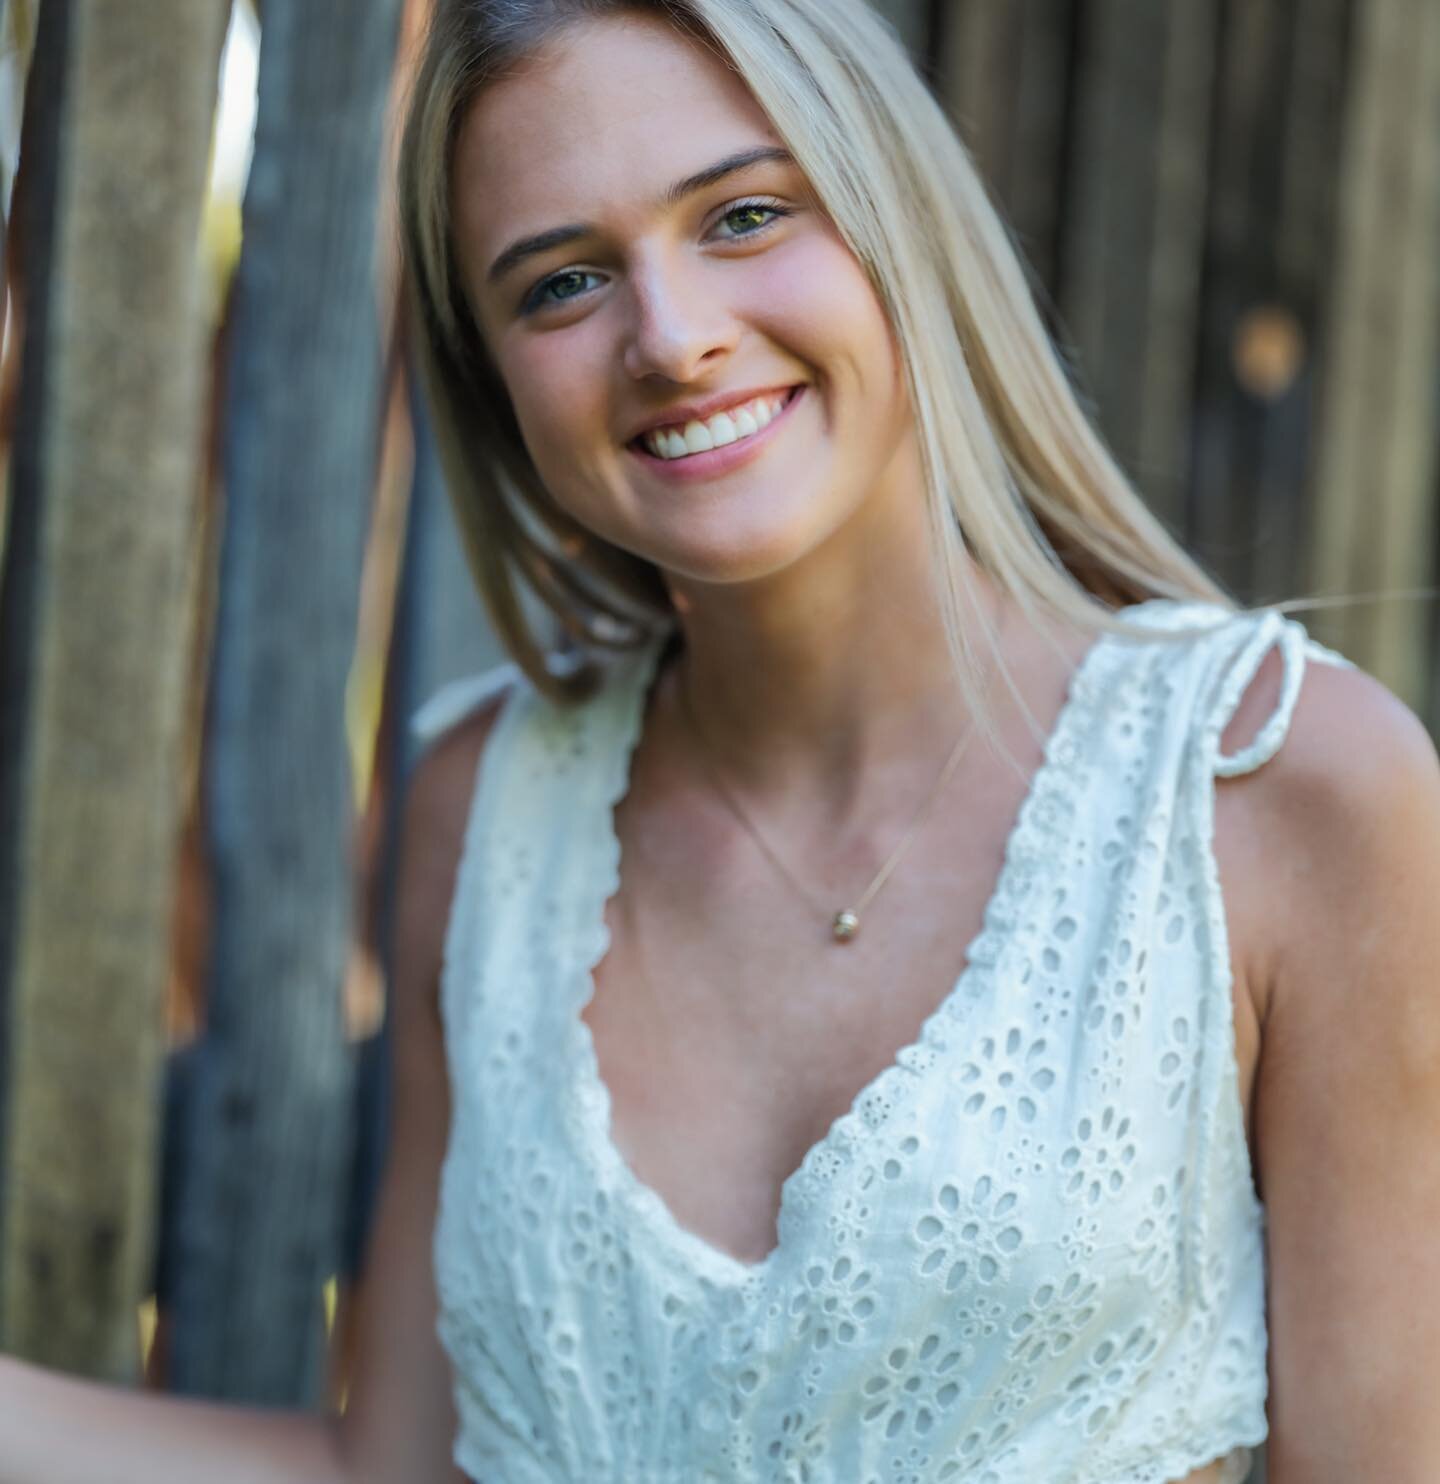 Ready for your senior photo experience?&nbsp; Let&rsquo;s create something amazing together!&nbsp; Our senior sessions are relaxed and fun, and you&rsquo;ll have a great time photographing with us.
During your senior session, you can have unlimited c